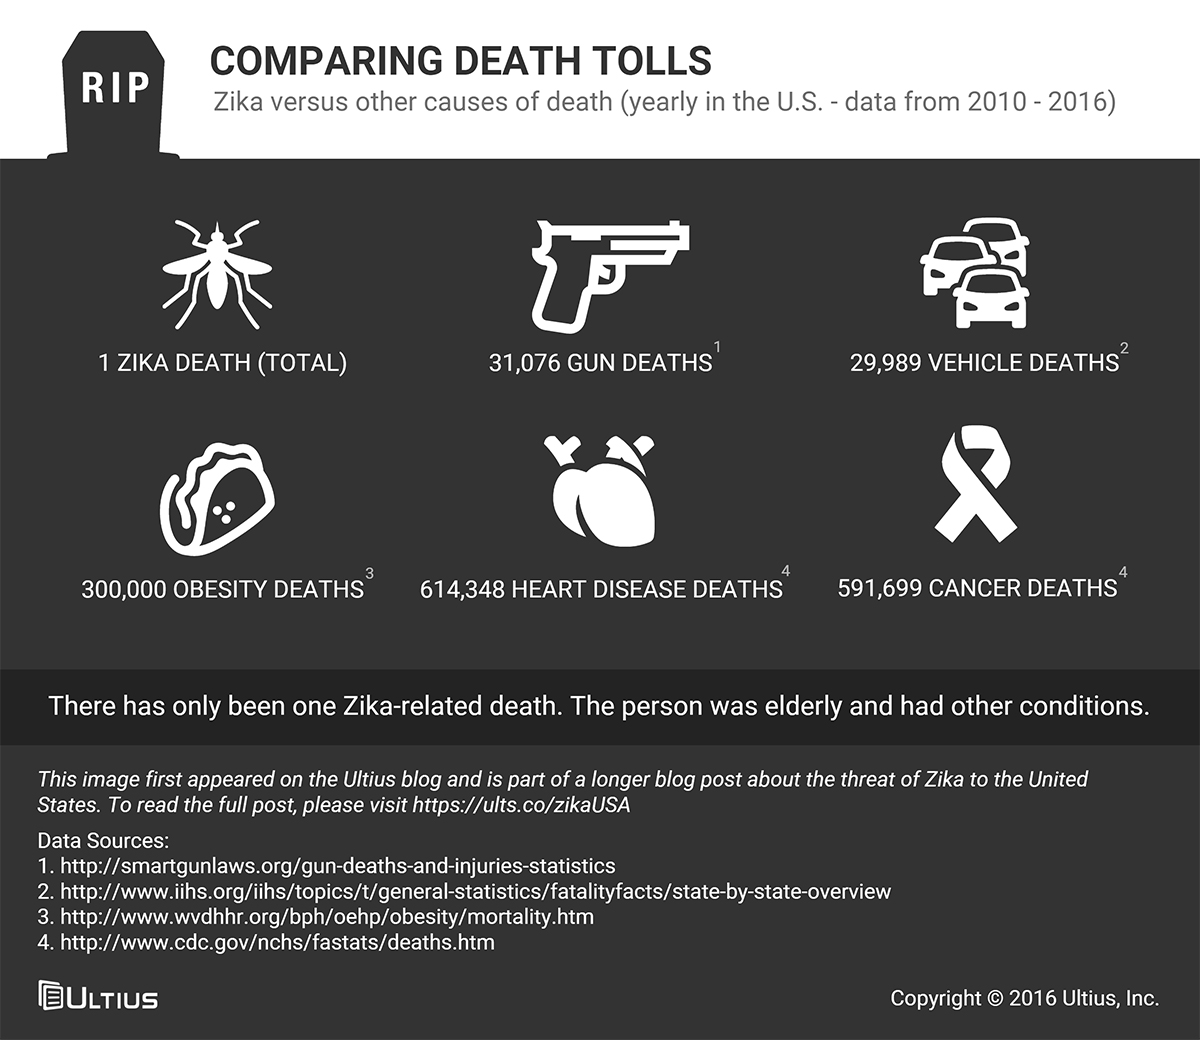 Zika death toll comparison chart - various fatality causes